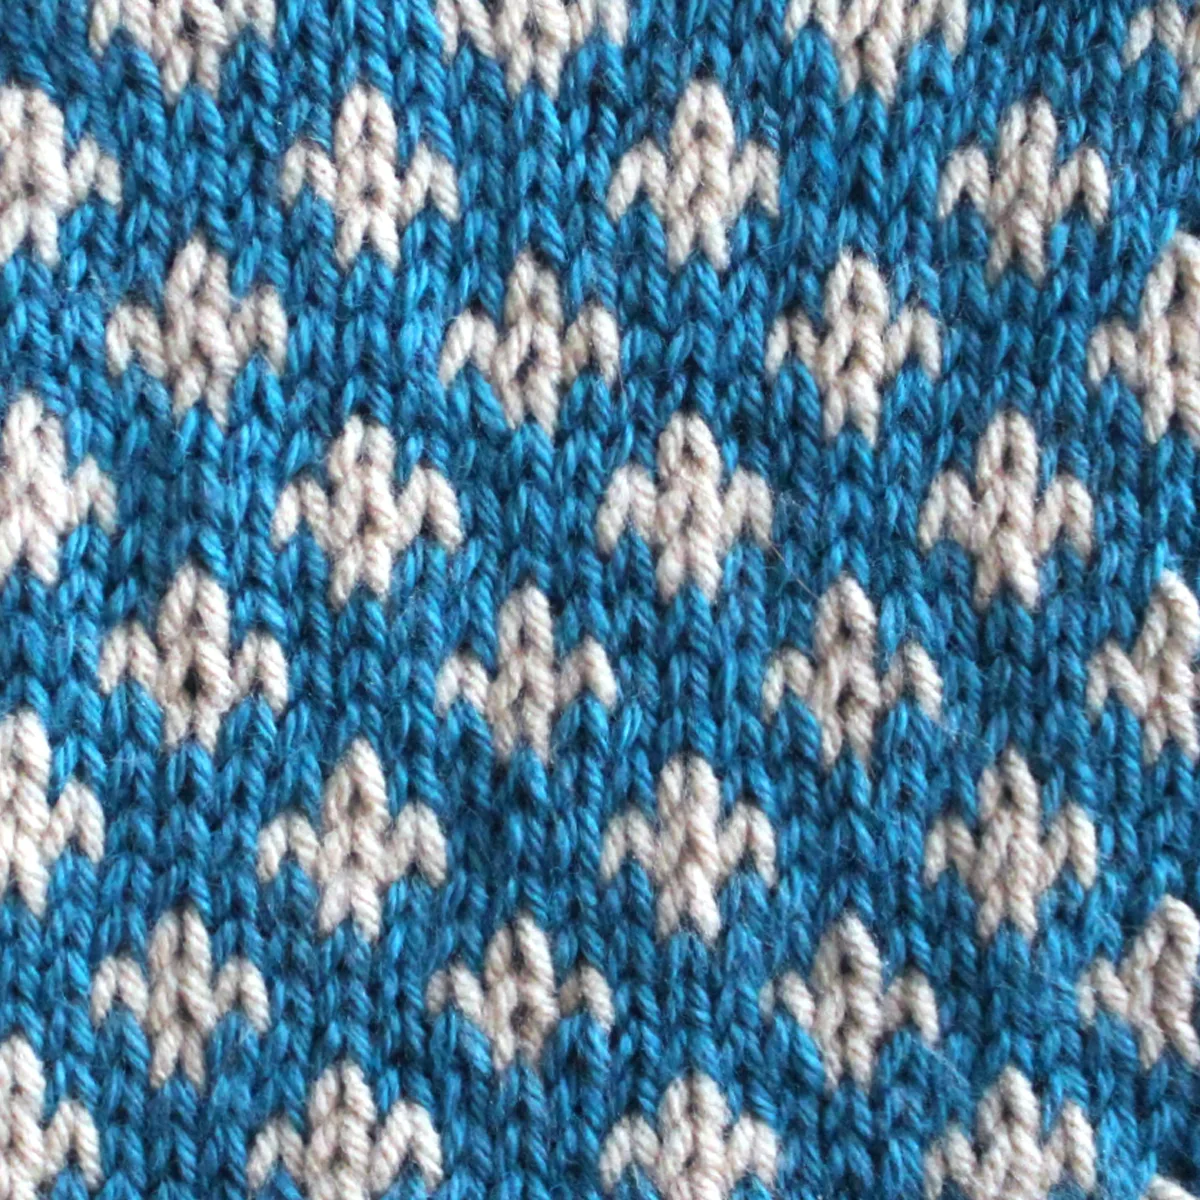 Fleur De Lys Stitch Knitting Pattern texture in blue and white colors of yarn.